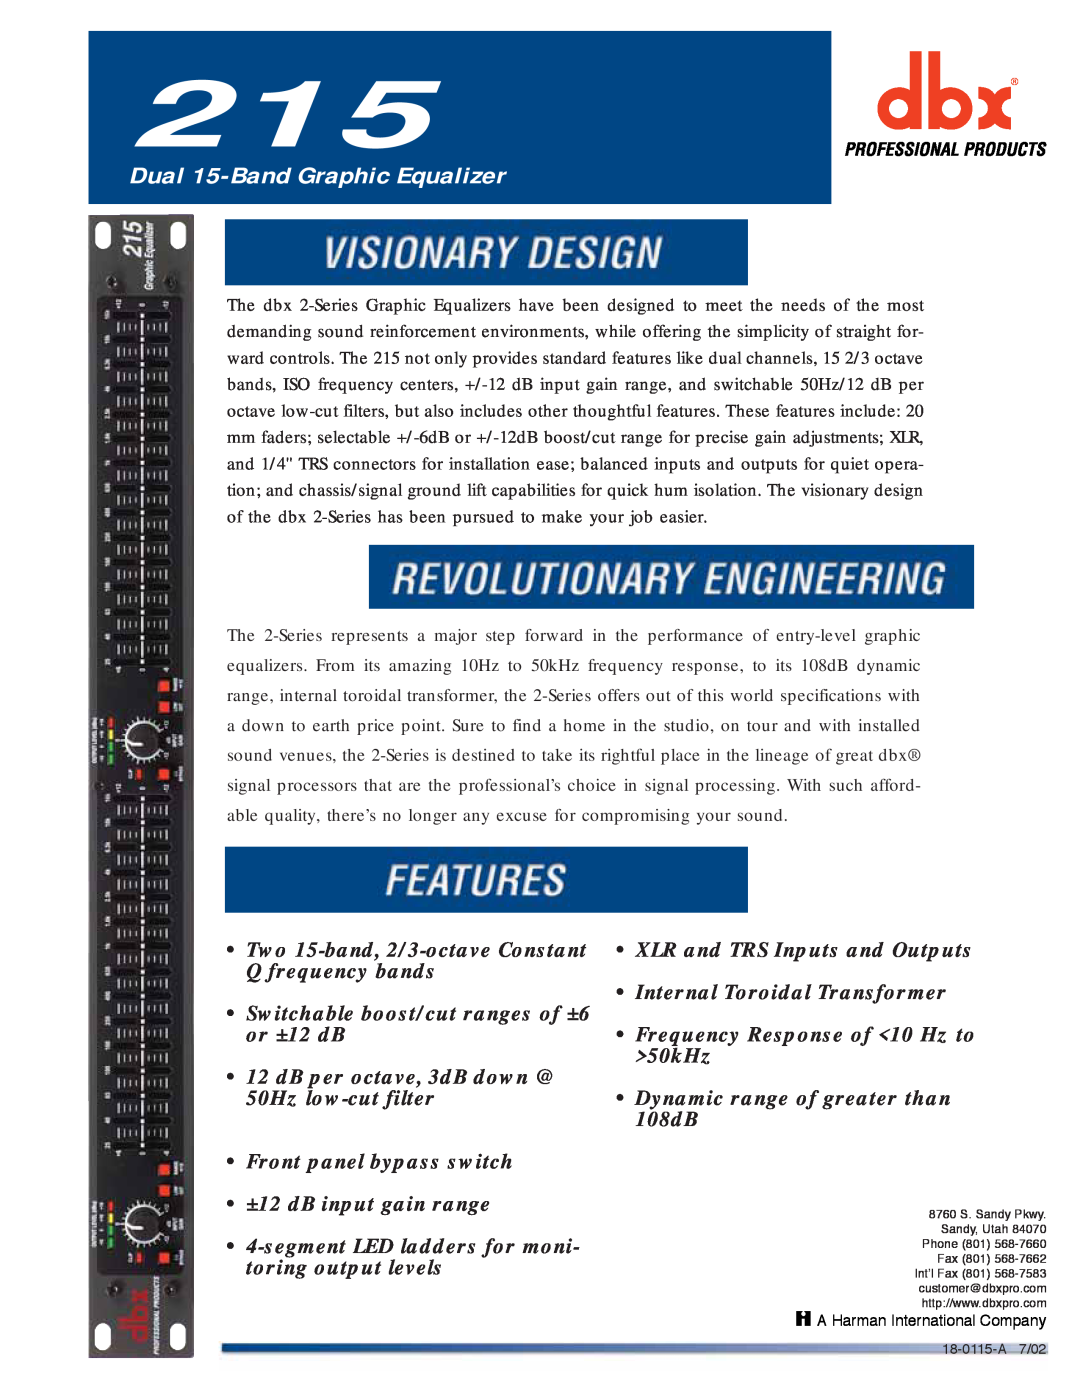 dbx Pro 215 specifications Dual 15-BandGraphic Equalizer 